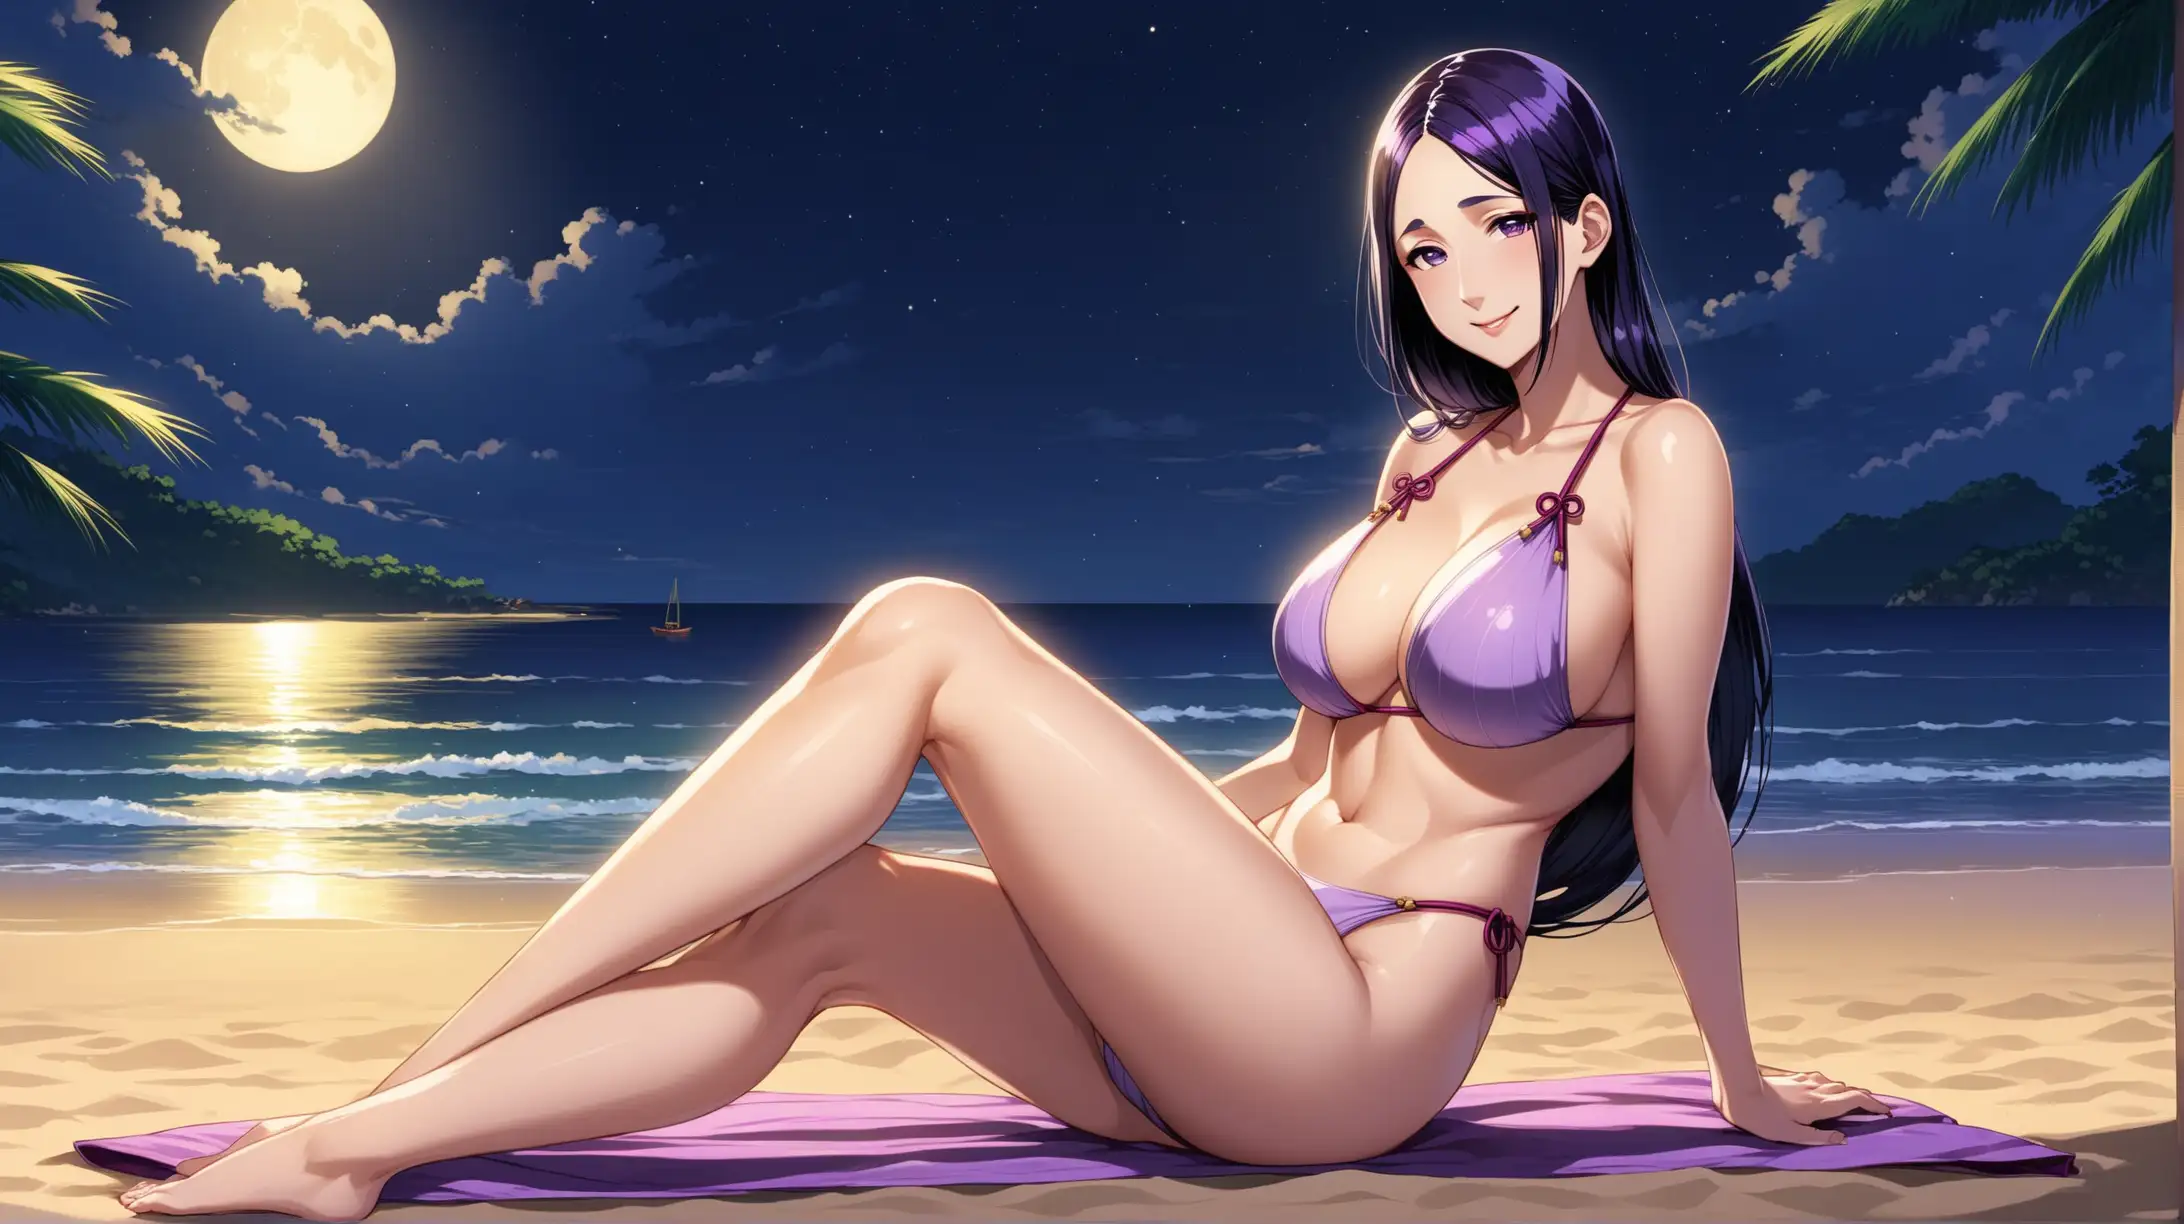 Draw the character Minamoto no Raikou, high quality, sitting in a relaxed pose, alone on the beach, at night, wearing a swimsuit, smiling at the viewer